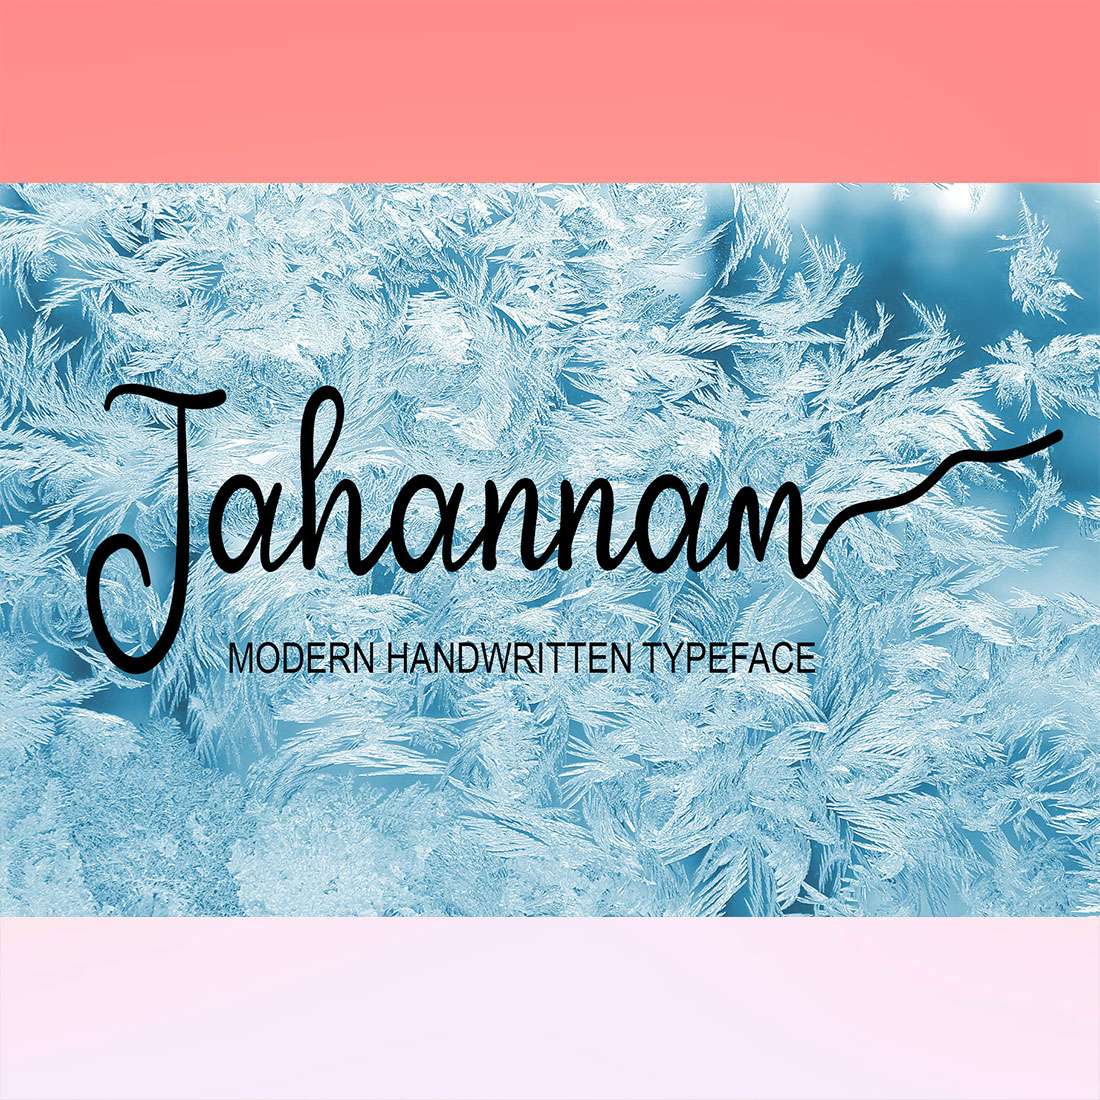 Jahannam-only$5 cover image.